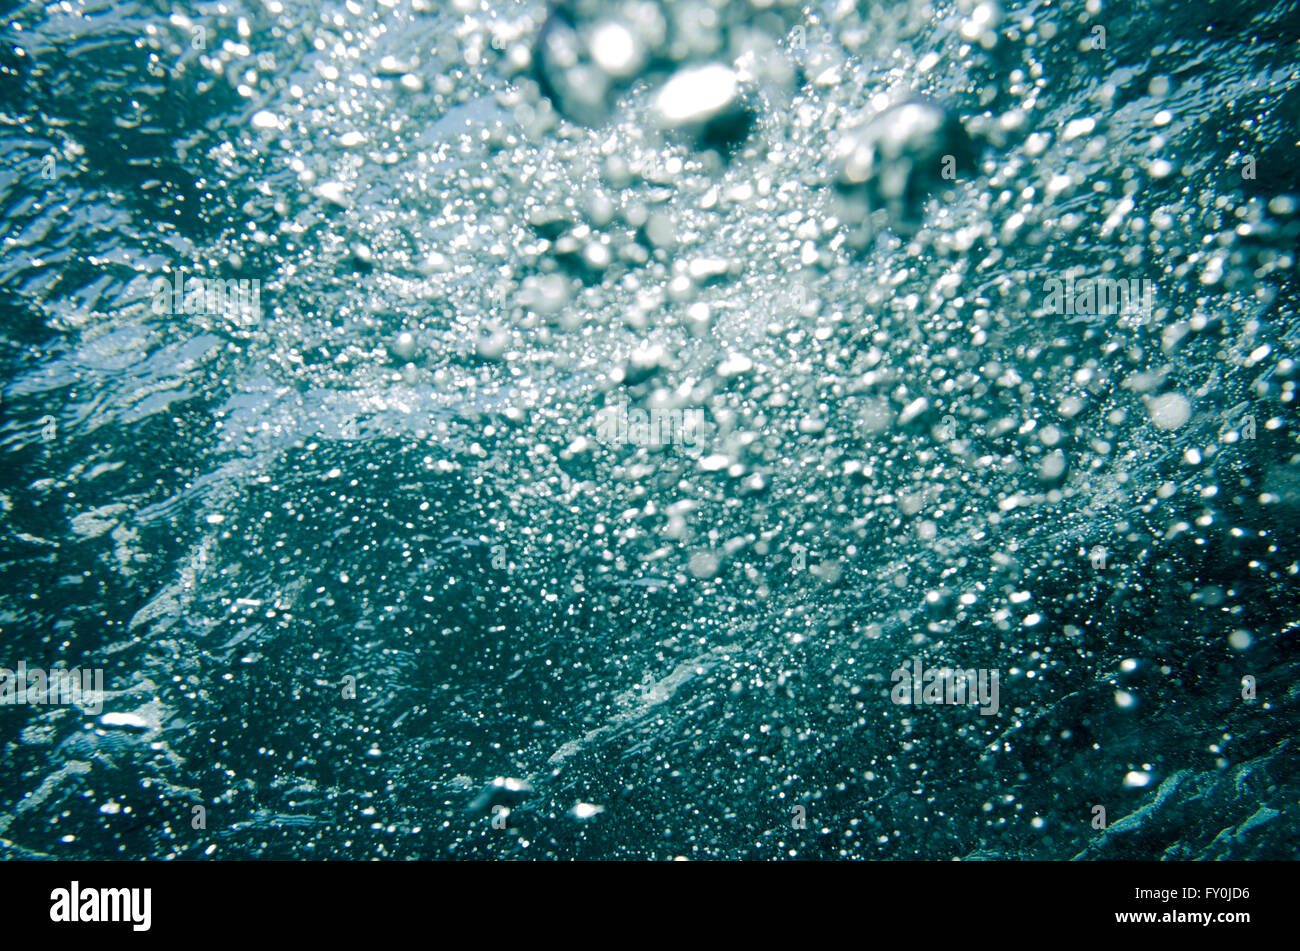 Out of focus abstract background of bubbles underwater Stock Photo